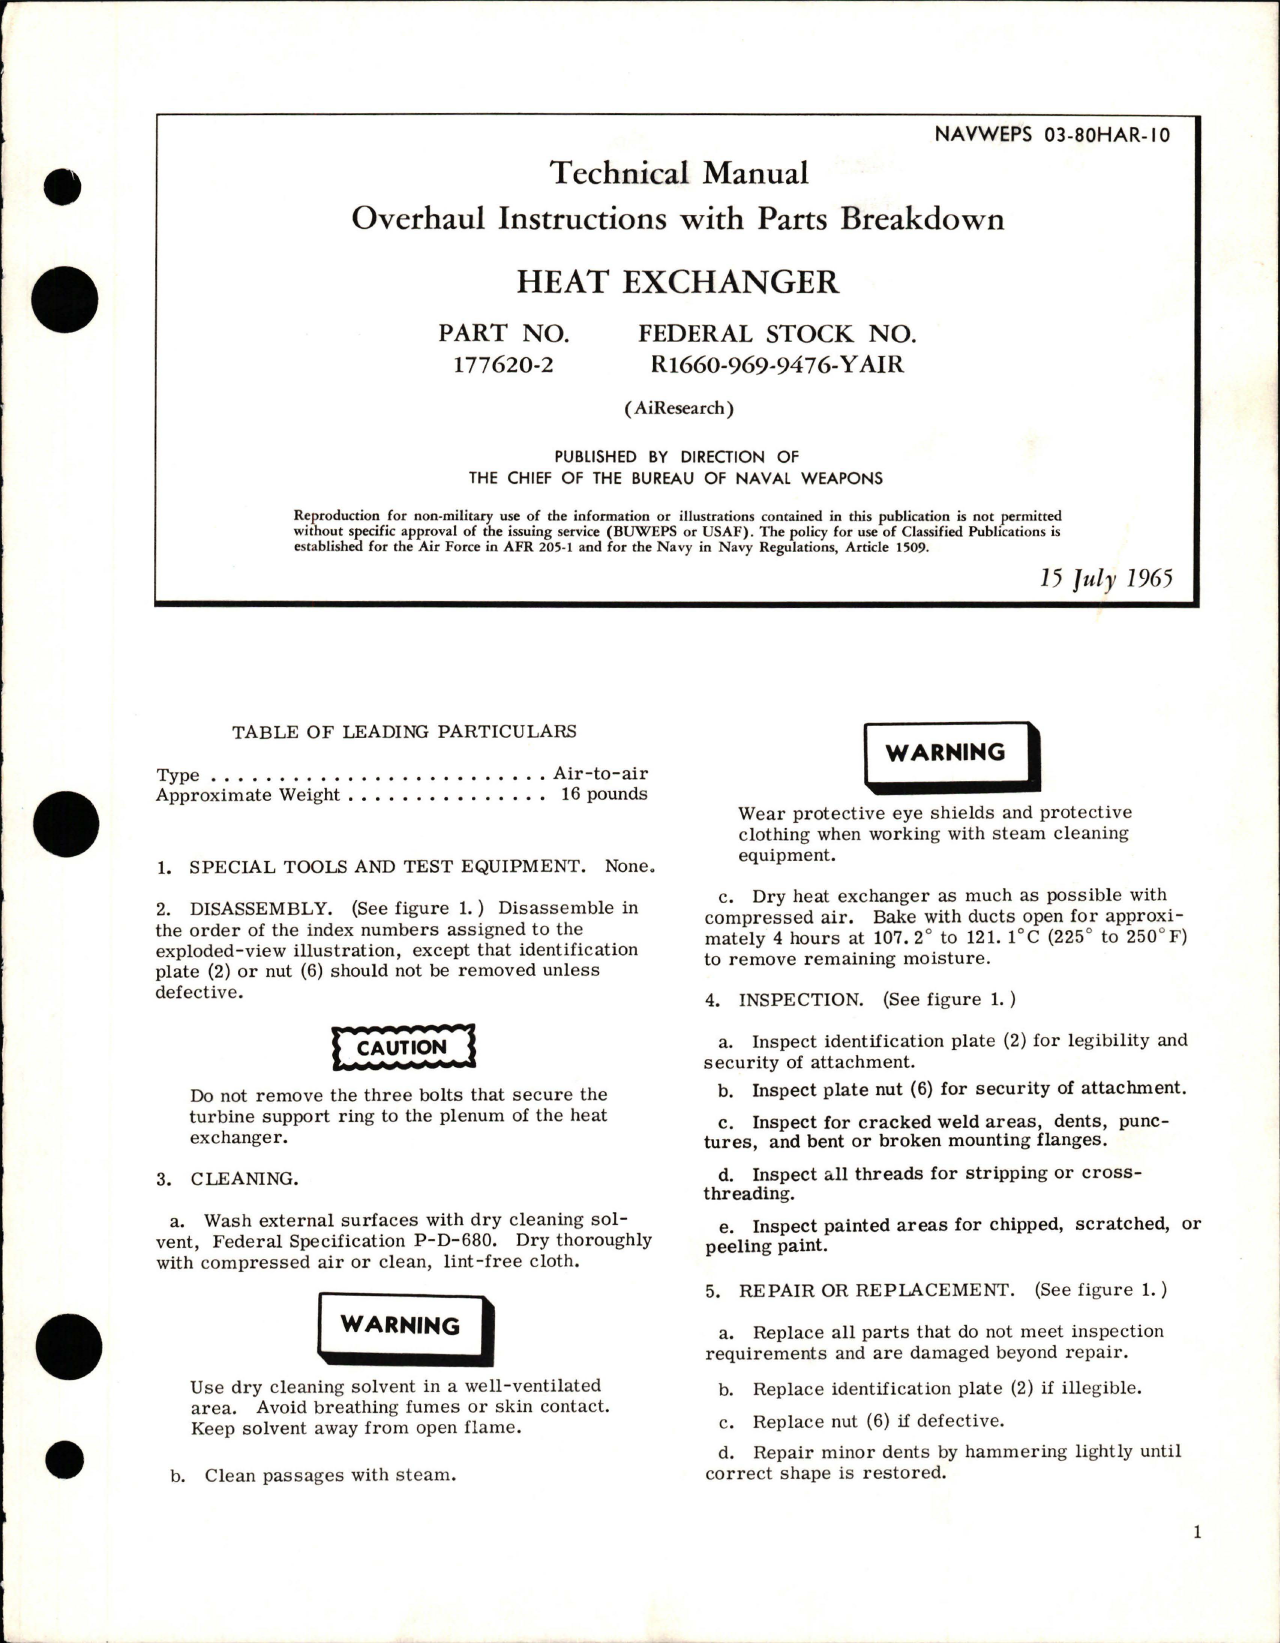 Sample page 1 from AirCorps Library document: Overhaul Instructions with Parts Breakdown for Heat Exchanger - Part 177620-2